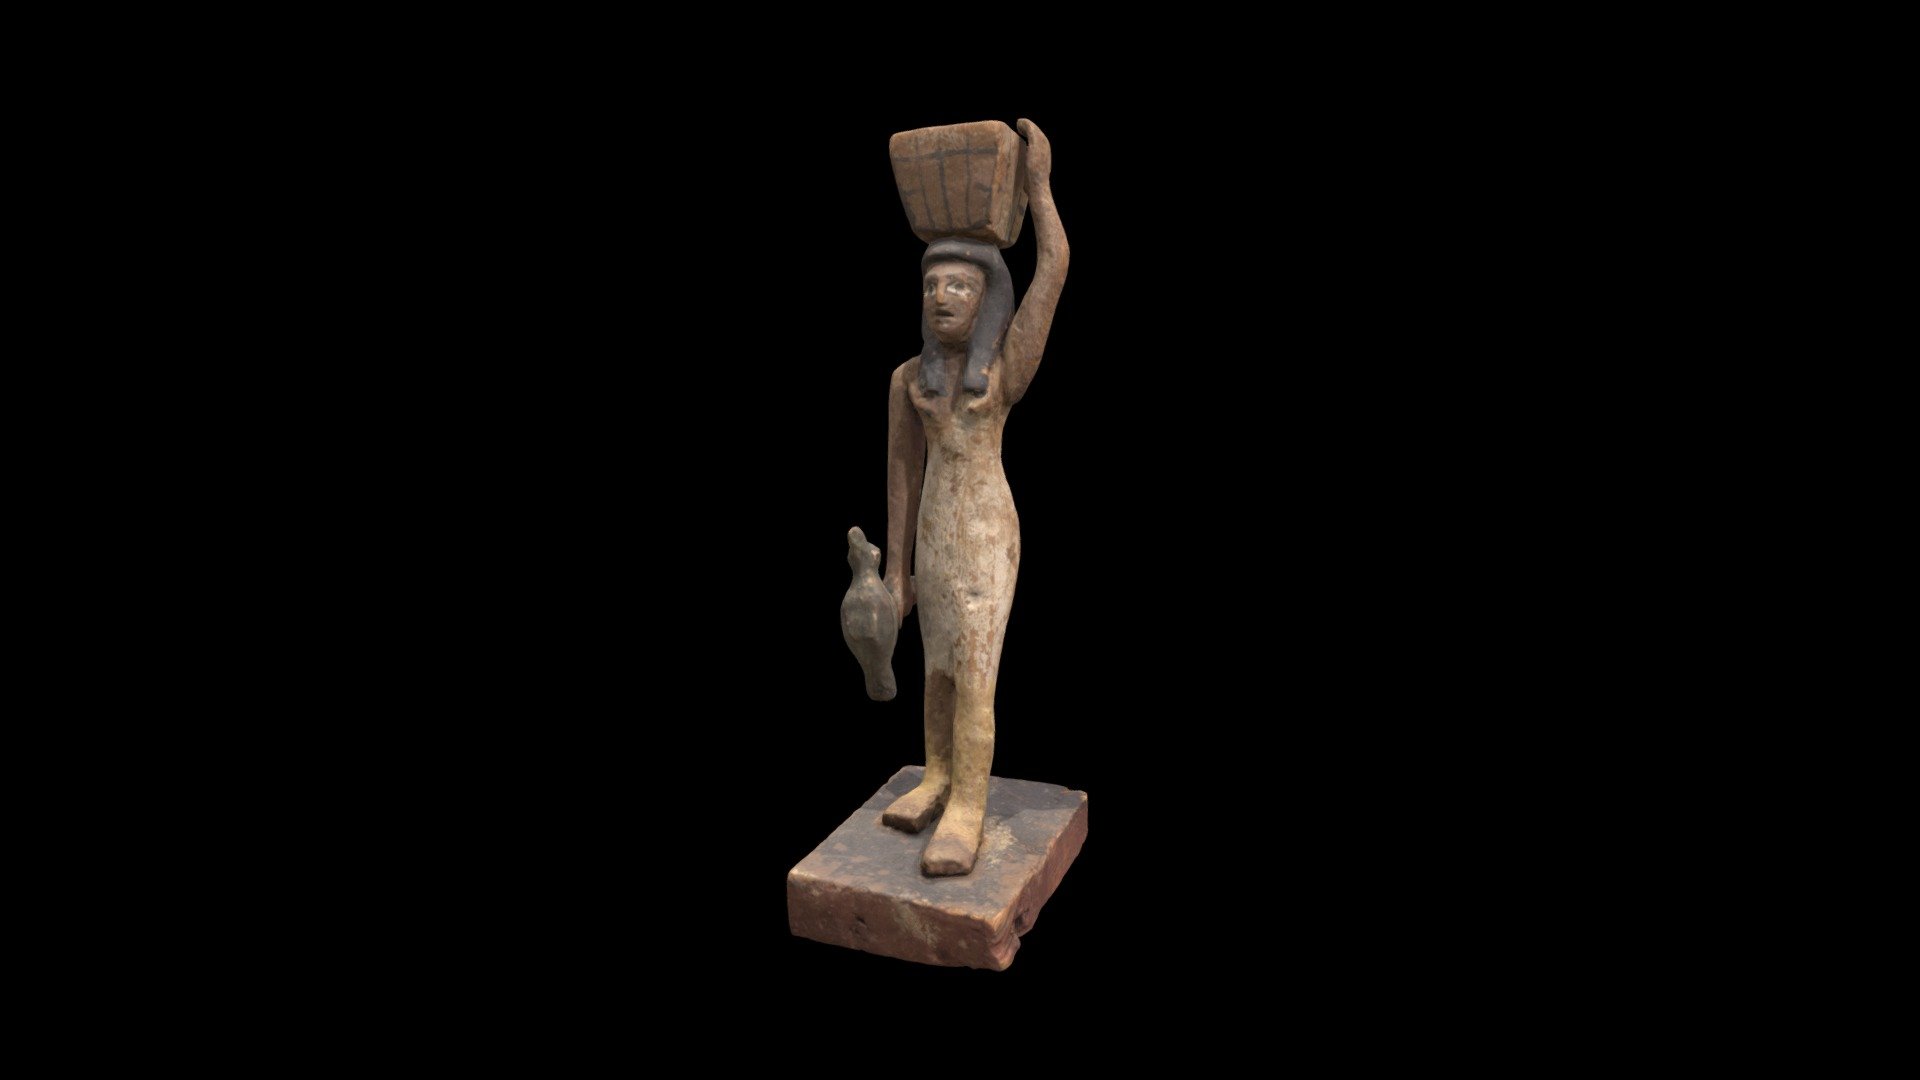 You can copy, modify, and distribute this work, even for commercial purposes, all without asking permission. Learn more about The Cleveland Museum of Art’s Open Access initiative: http://www.clevelandart.org/open-access-faqs 

Female Offering Bearer, 2000–1801 BCE. Egypt, Middle Kingdom (2040–1648 BCE), Dynasties 11–12. Painted wood, figure of tamarisk(?), base of sycamore fig; overall: 25.8 x 7.9 x 12.2 cm (10 3/16 x 3 1/8 x 4 13/16 in.). The Cleveland Museum of Art, Gift of the John Huntington Art and Polytechnic Trust 1914.602

Learn more on The Cleveland Museum of Art’s Collection Online: https://www.clevelandart.org/art/1914.602 - 1914.602 Female Offering Bearer - Download Free 3D model by Cleveland Museum of Art (@clevelandart) 3d model